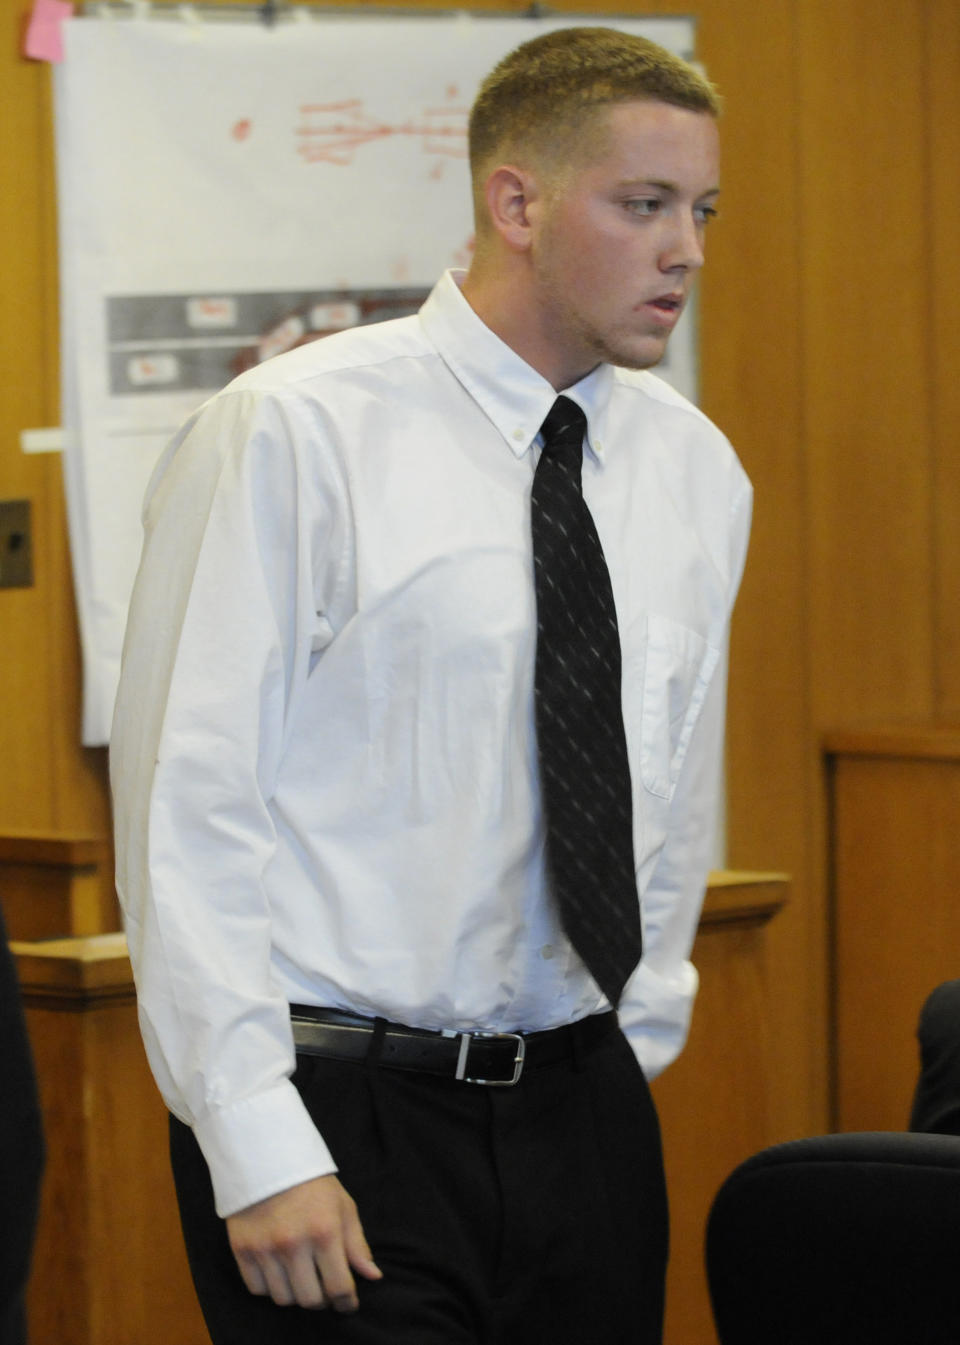 Defendant Aaron Deveau, 18, walks towards the stand at Haverhill District Court in Haverhill, Mass. Tuesday, June 5, 2012, where he is on trial on charges of motor vehicle homicide while texting. Authorities say the then-17-year-old Deveau was texting when he crossed the center line of a Haverhill street on Feb. 20, 2011 and crashed into a vehicle driven by 55-year-old Donald Bowley of Danville, N.H., who died 18 days later in the hospital. (AP Photo/Eagle Tribune, Paul Bilodeau, Pool)